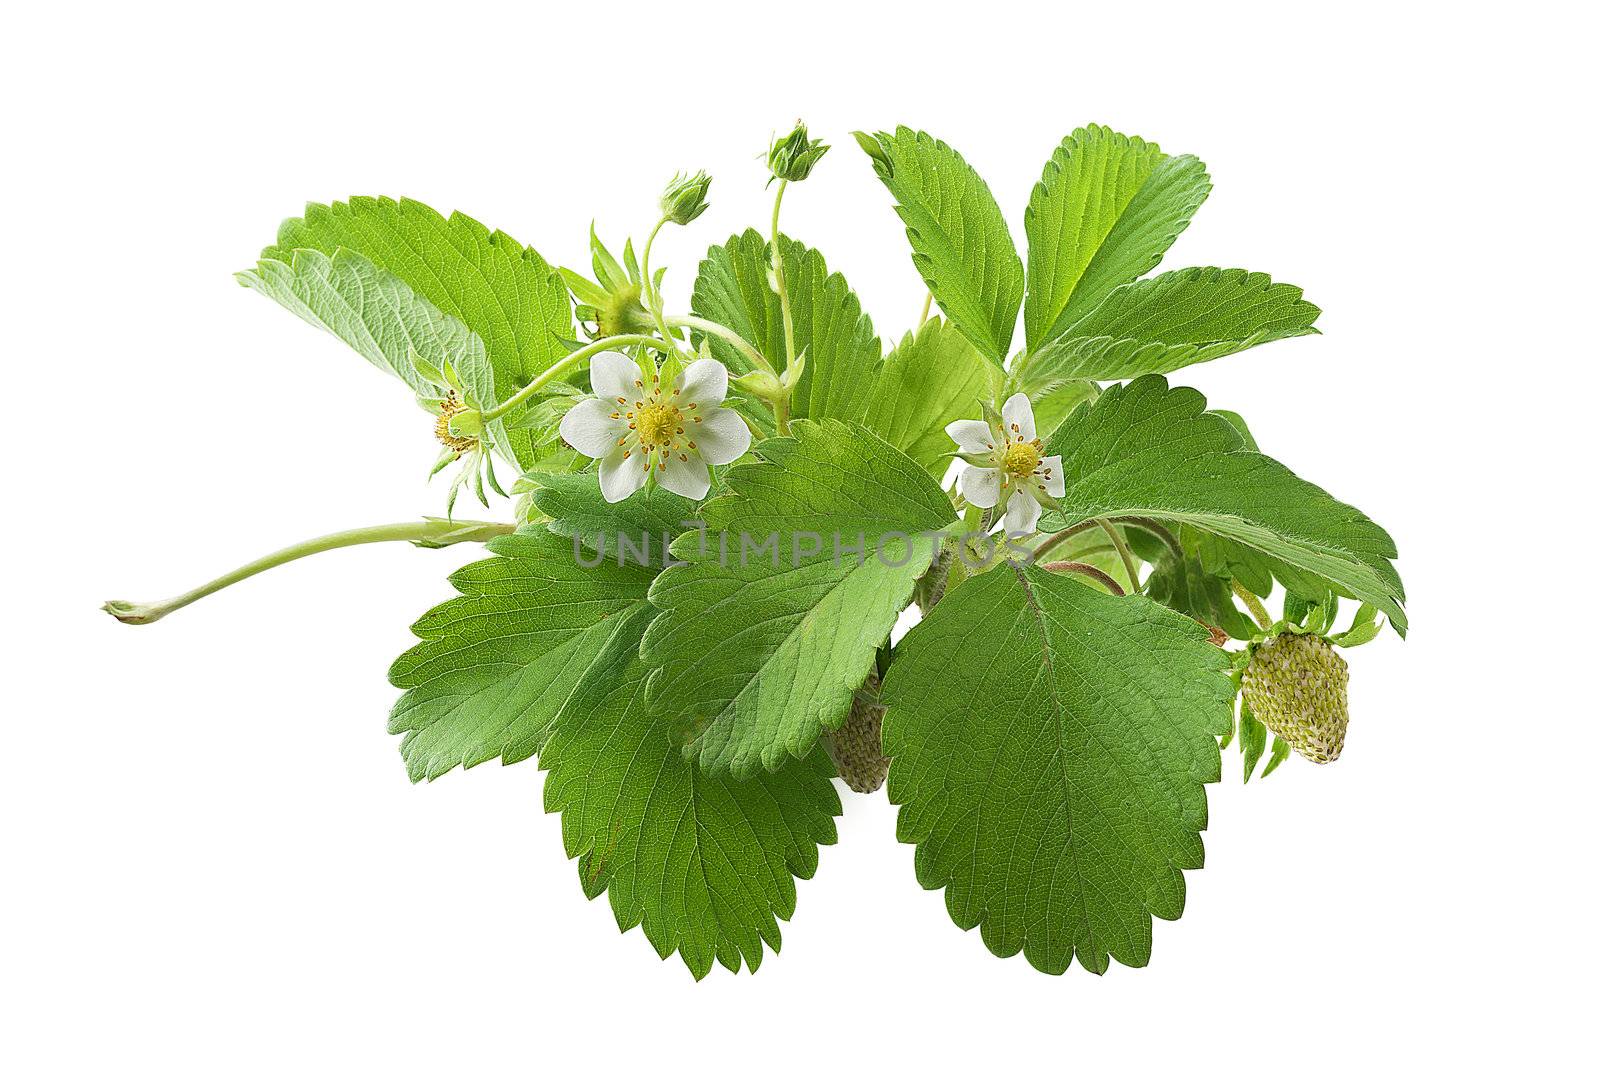 Bush of wild strawberry with flowers on the white background